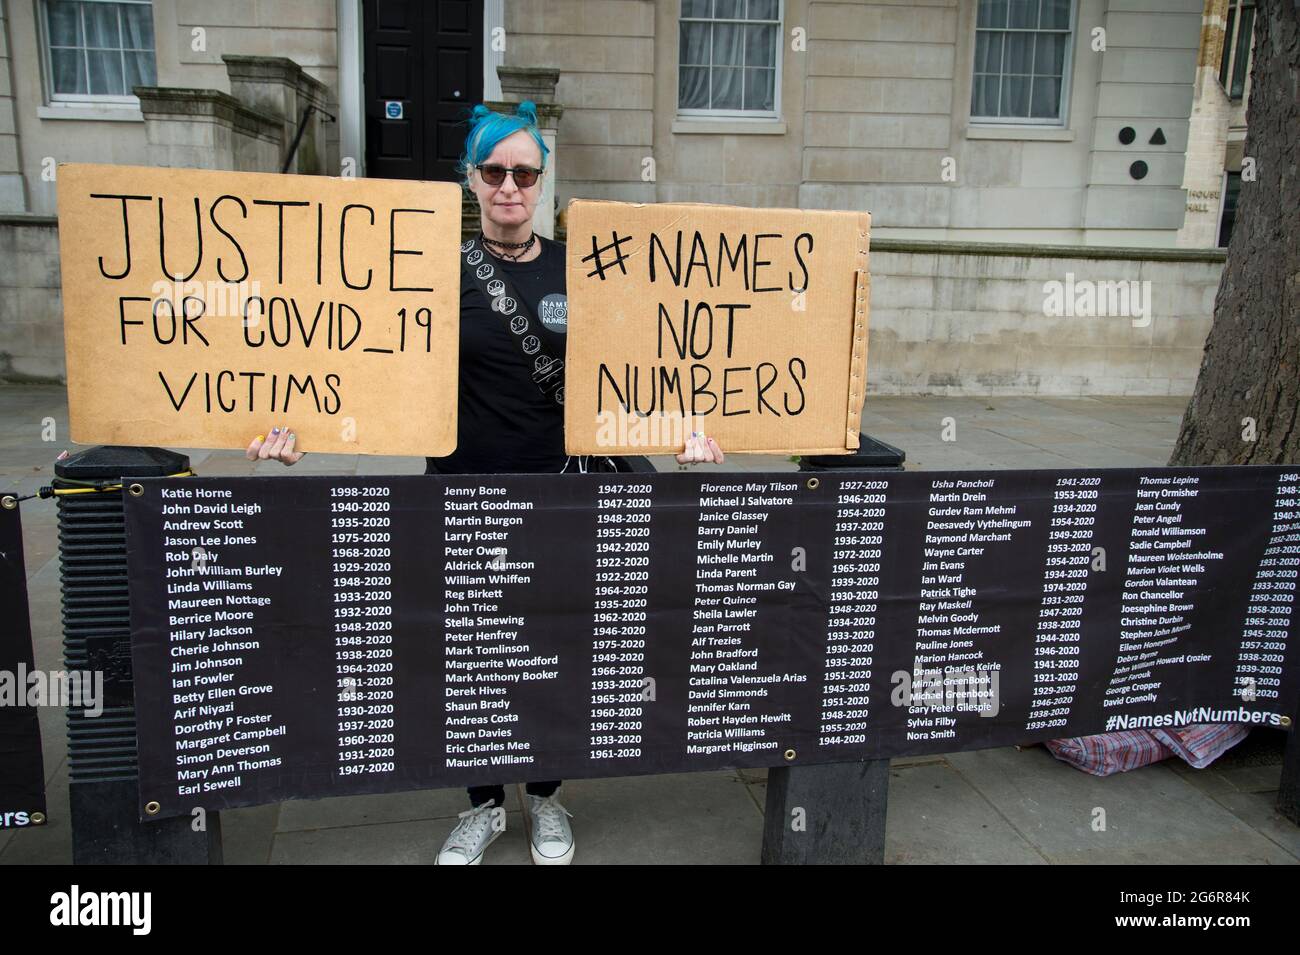 Sue, one of the first members of 'Justice for Covid 19 victims, after the death of her father from Covid, protests in front of Downing Street with the Stock Photo